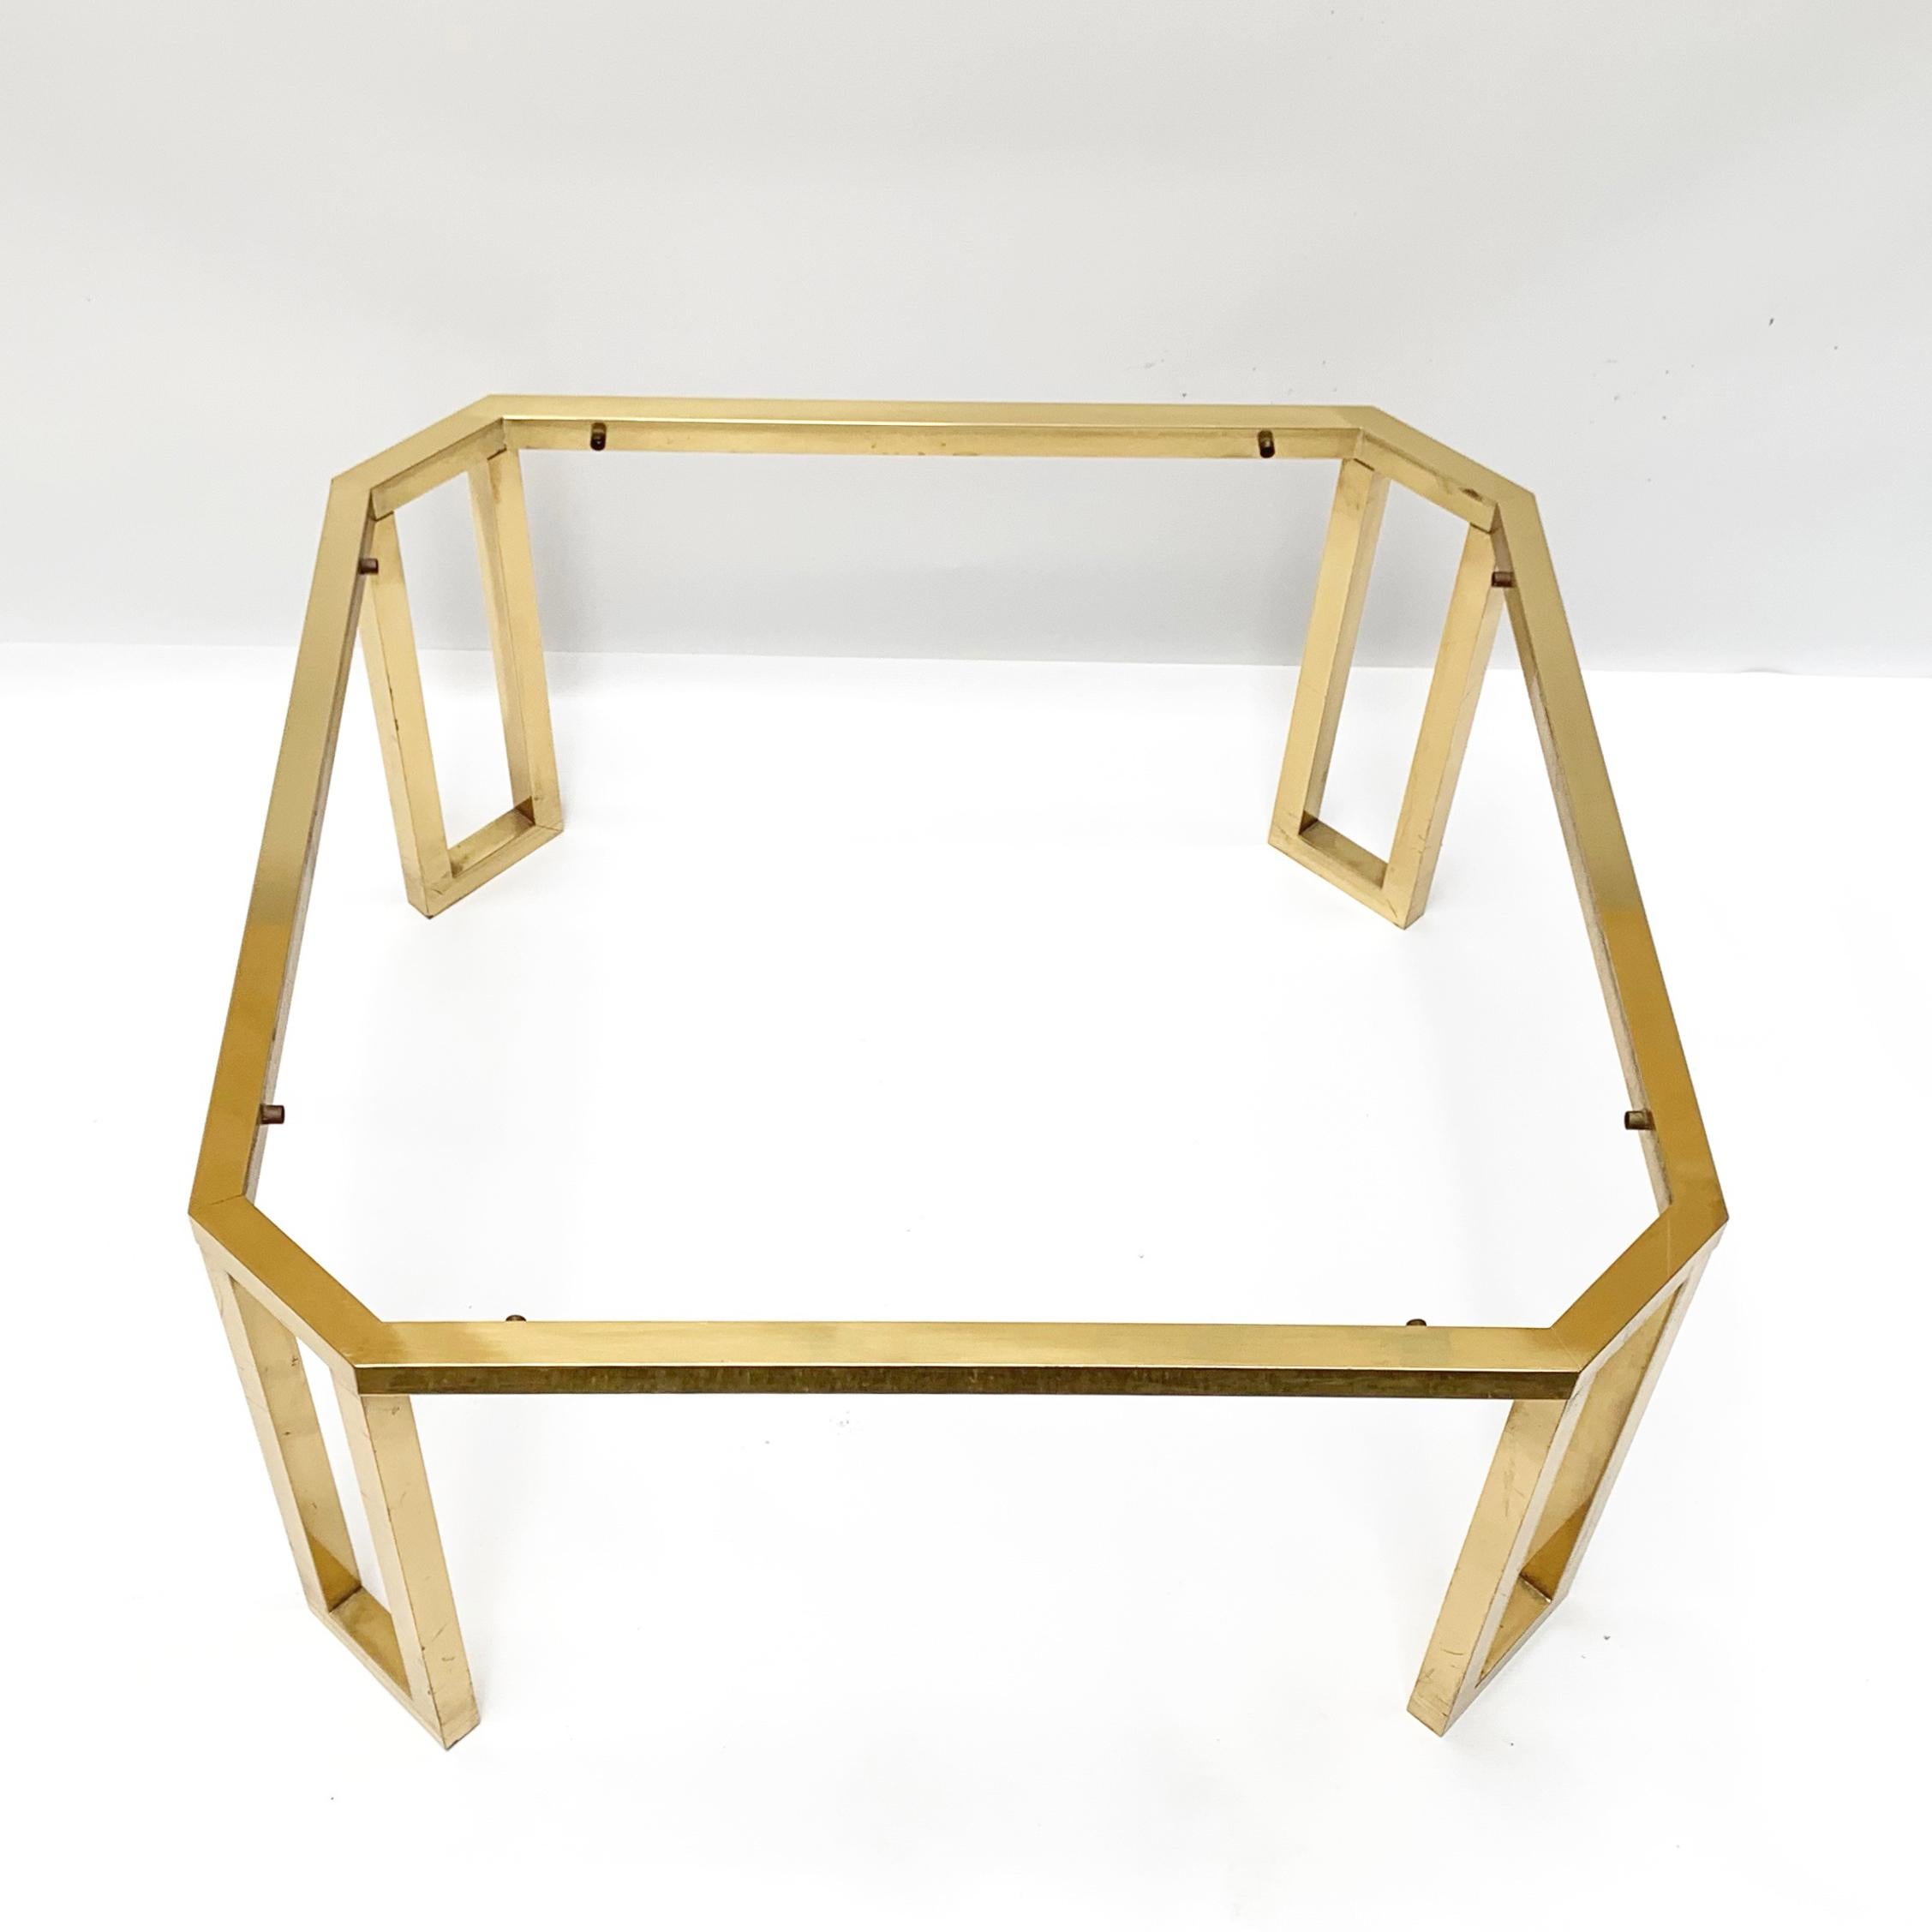 Maison Jansen Octagonal Tables in Brass and Glass, France, 1970s Coffee Tables For Sale 3